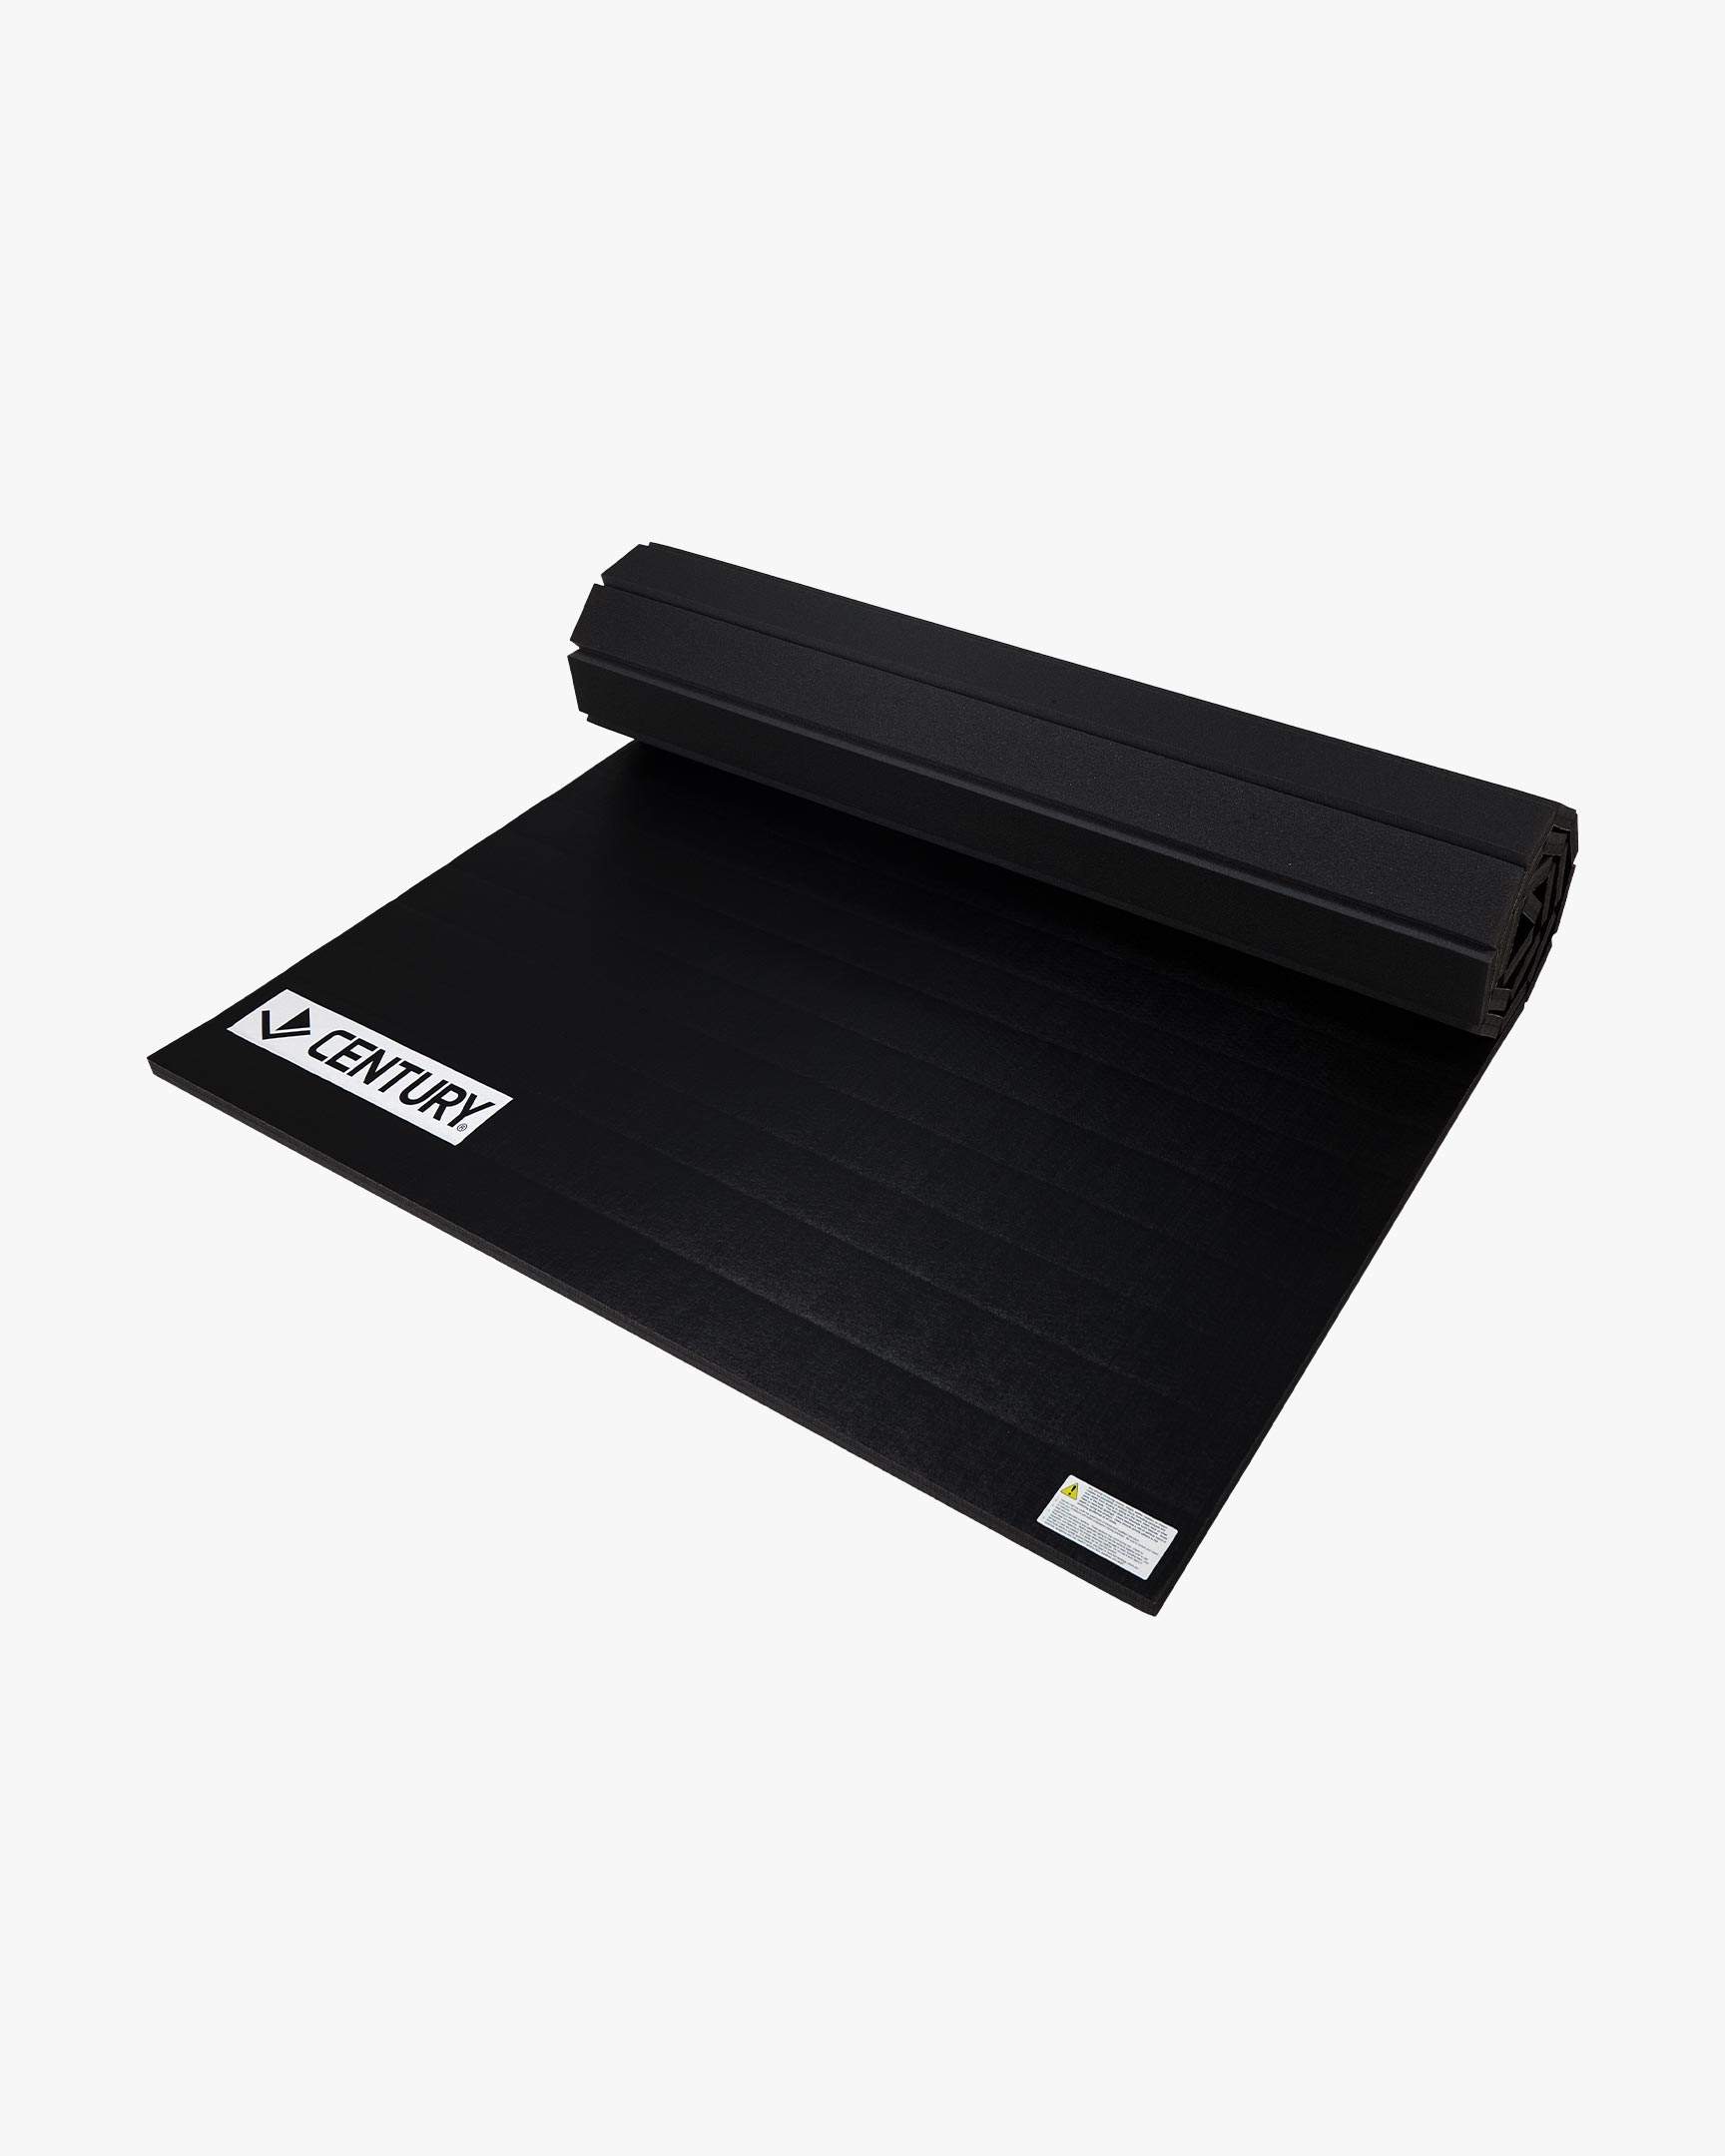 5' x 13' Century Smooth Roll Out Mat